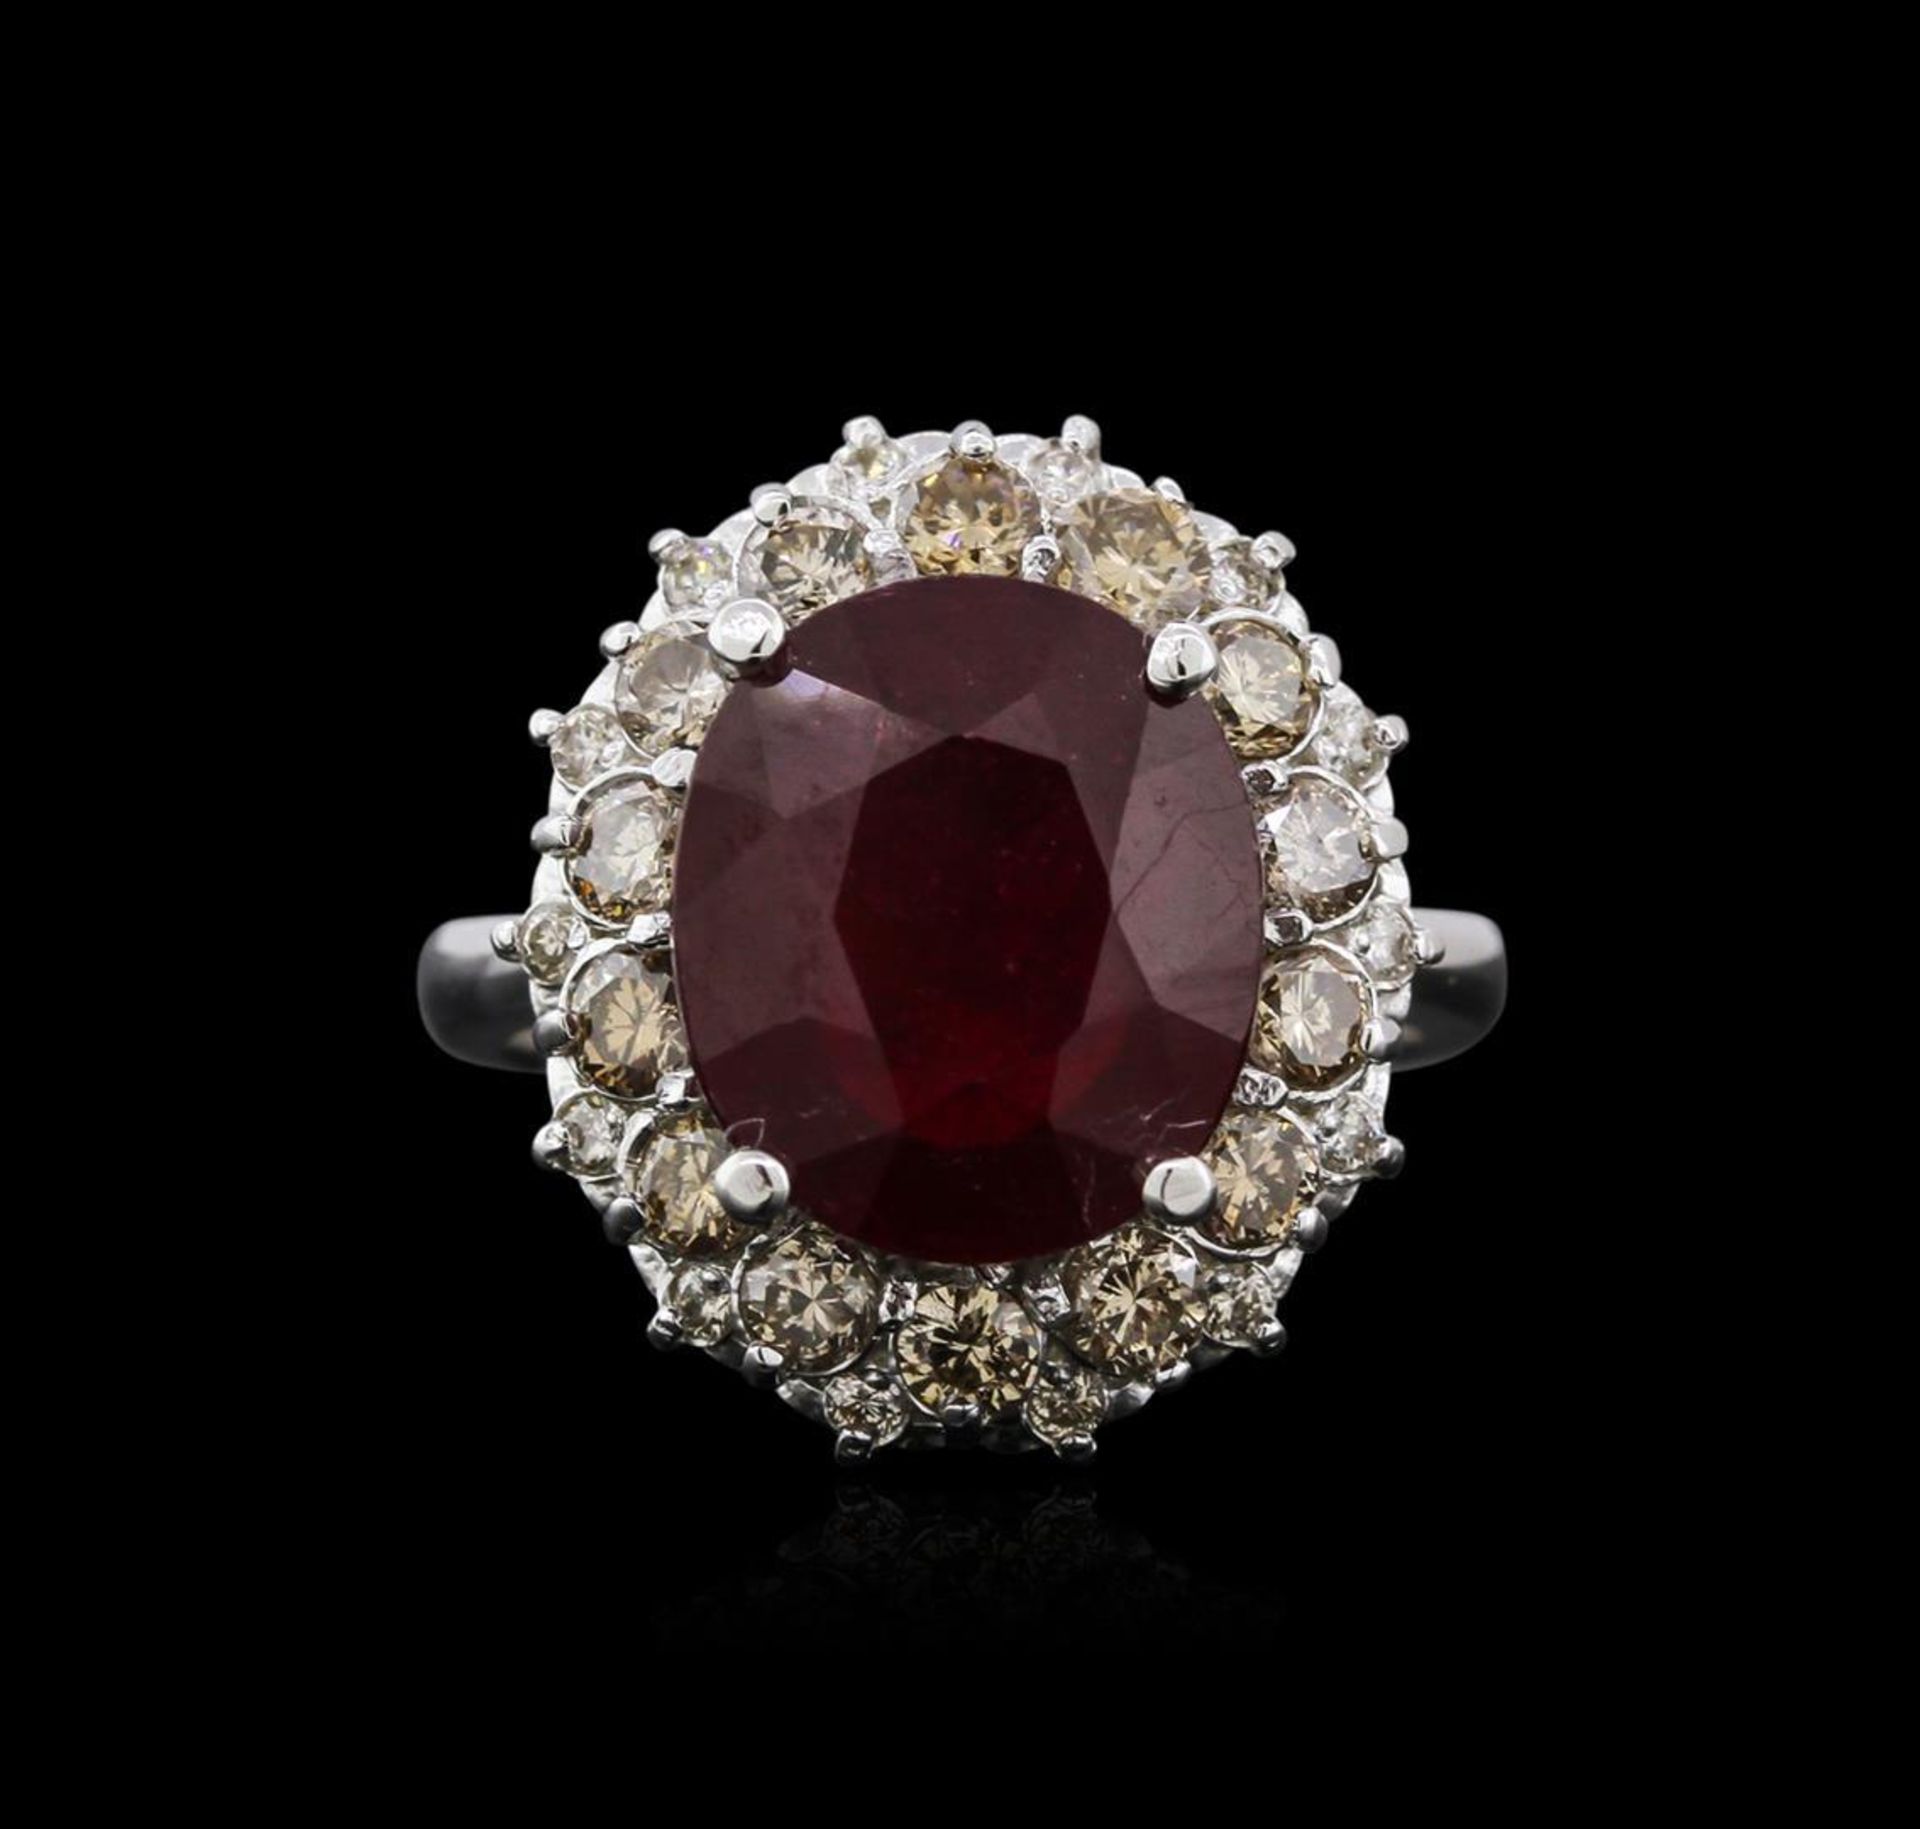 14KT White Gold 6.16 ctw Ruby and Diamond Ring - Image 2 of 4